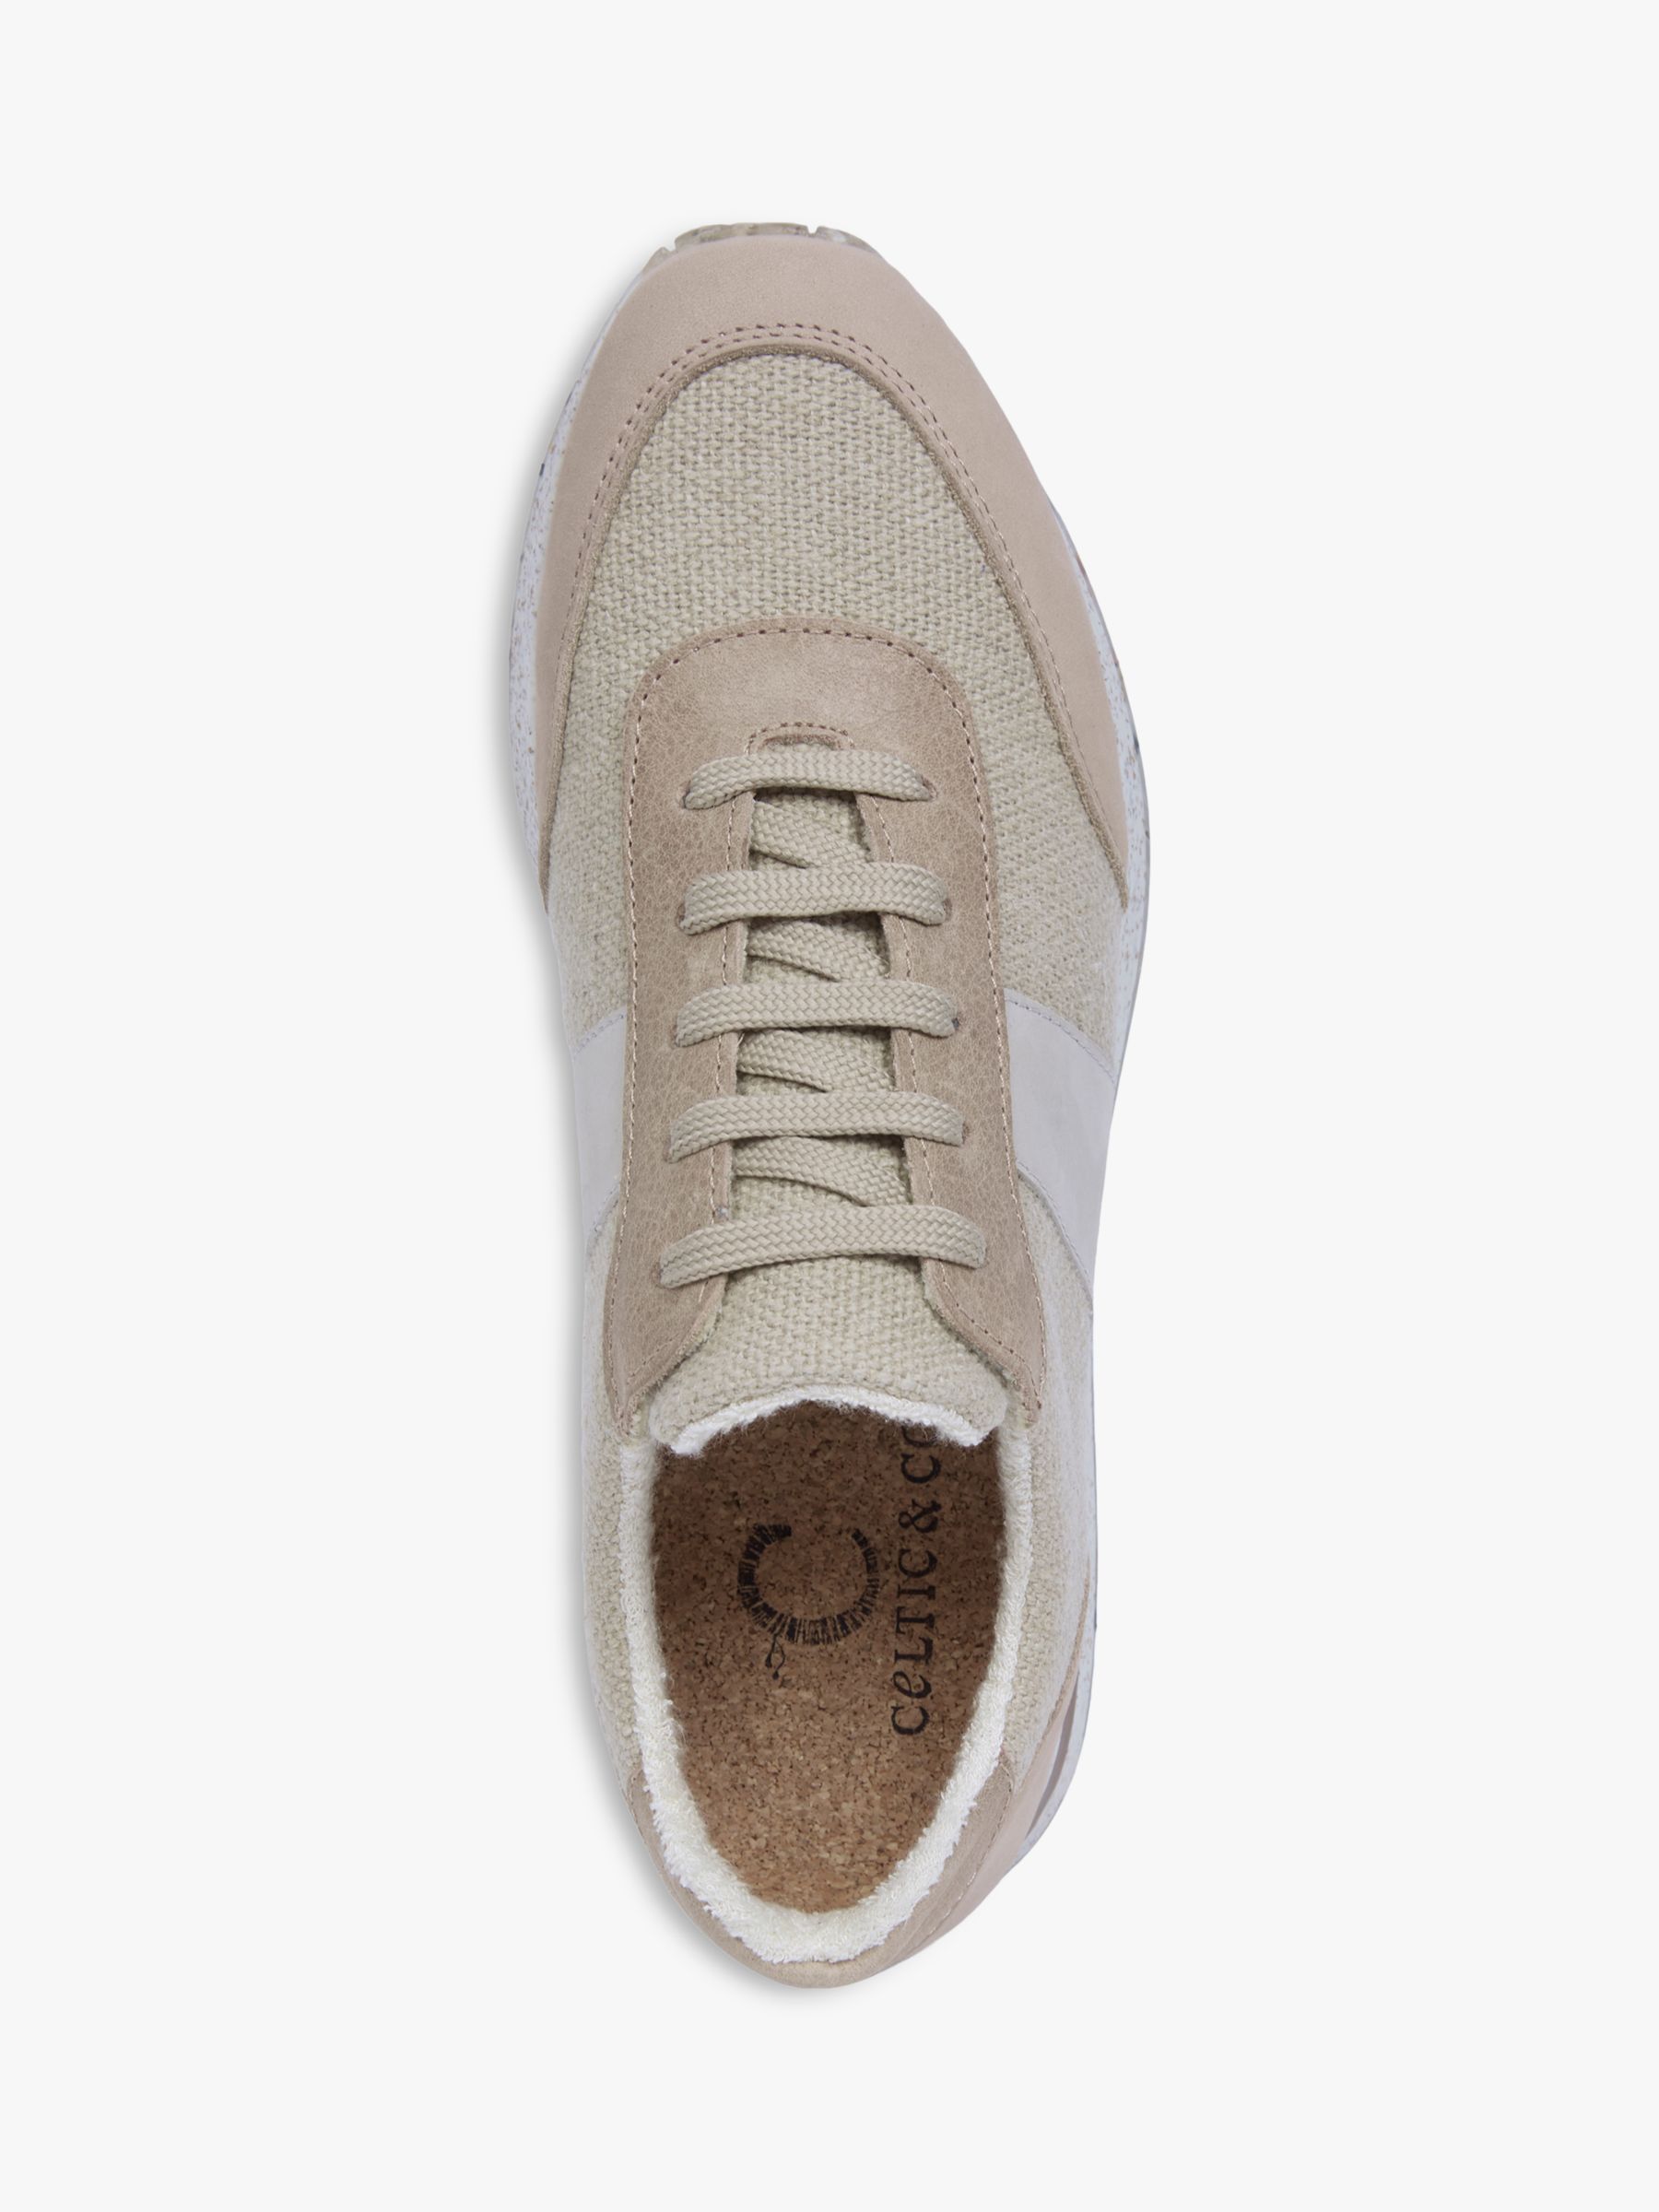 Buy Celtic & Co. Recycled Lace Up Trainers Online at johnlewis.com